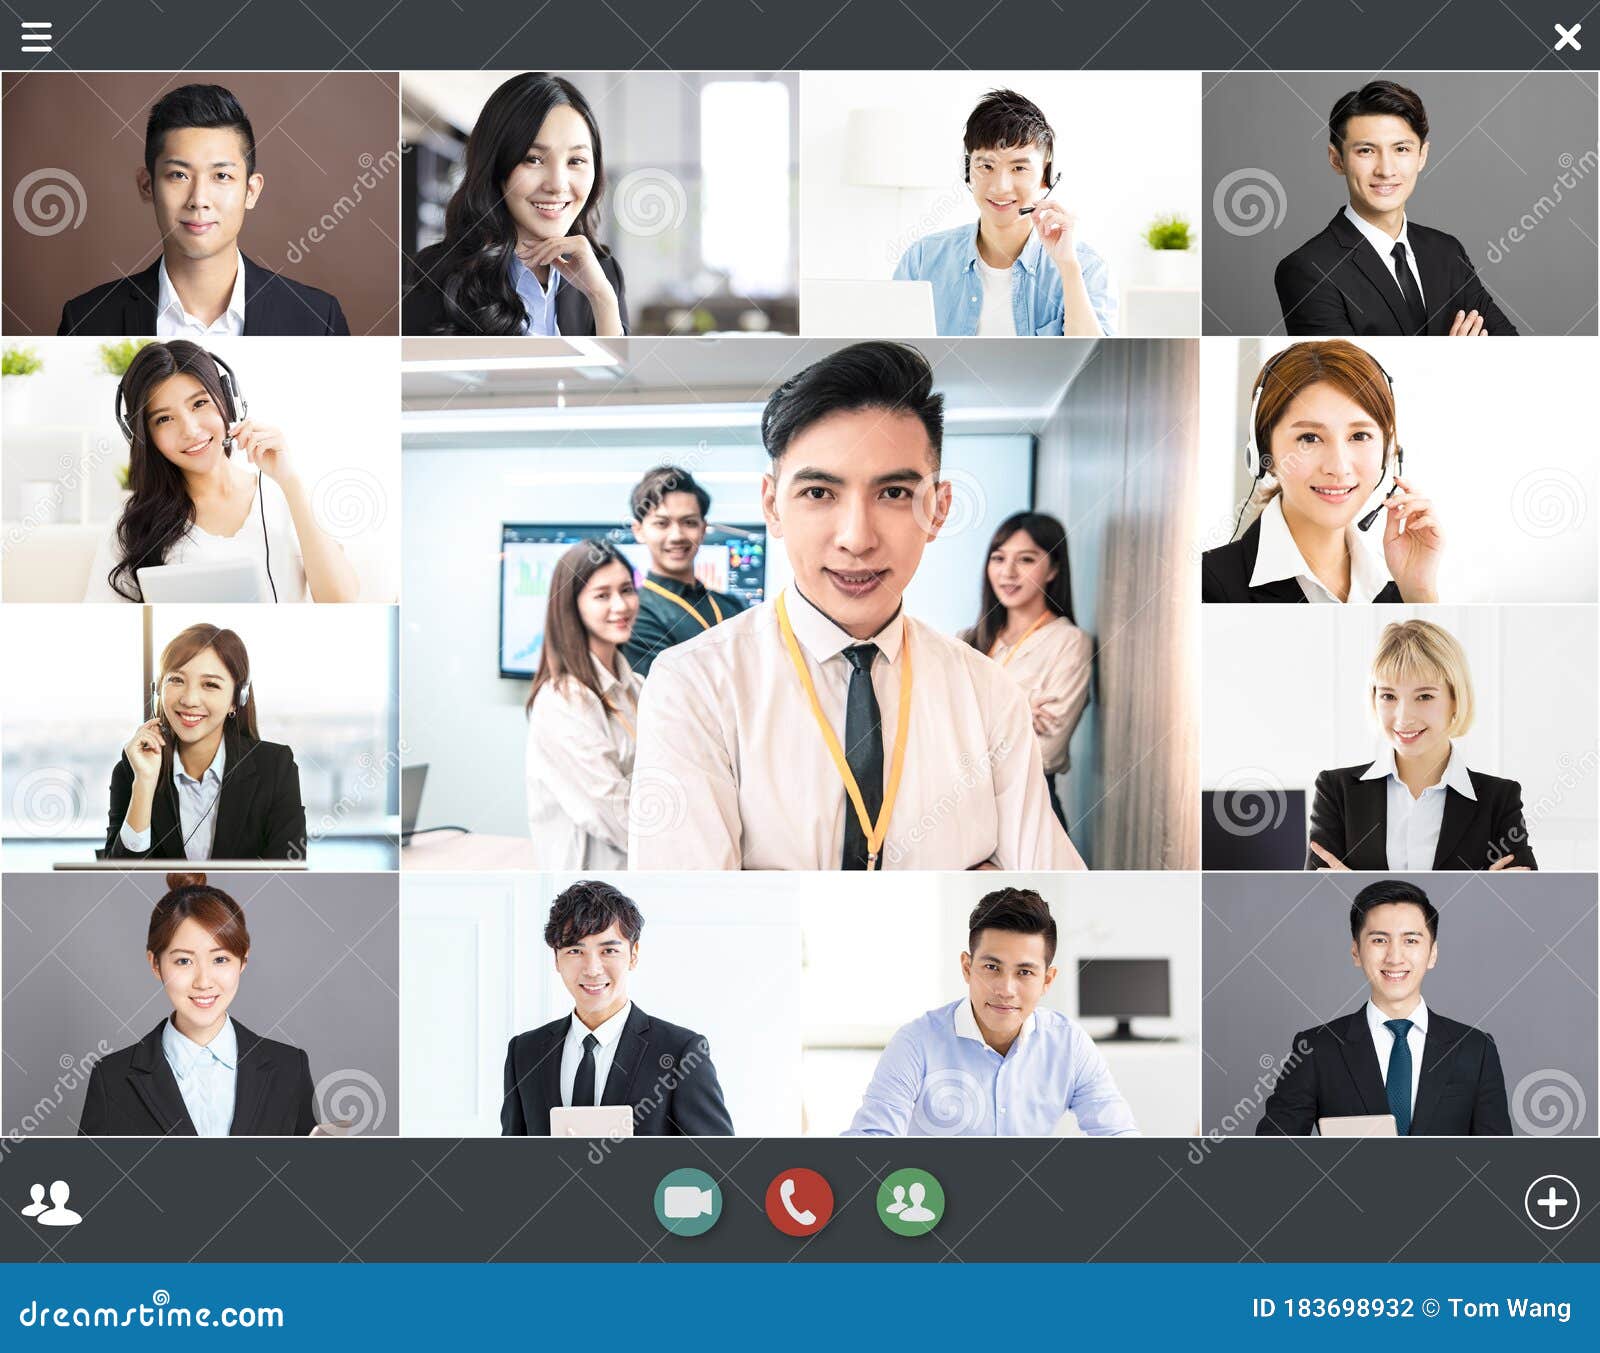 screenshot of smiling business group online brainstorm on video conference